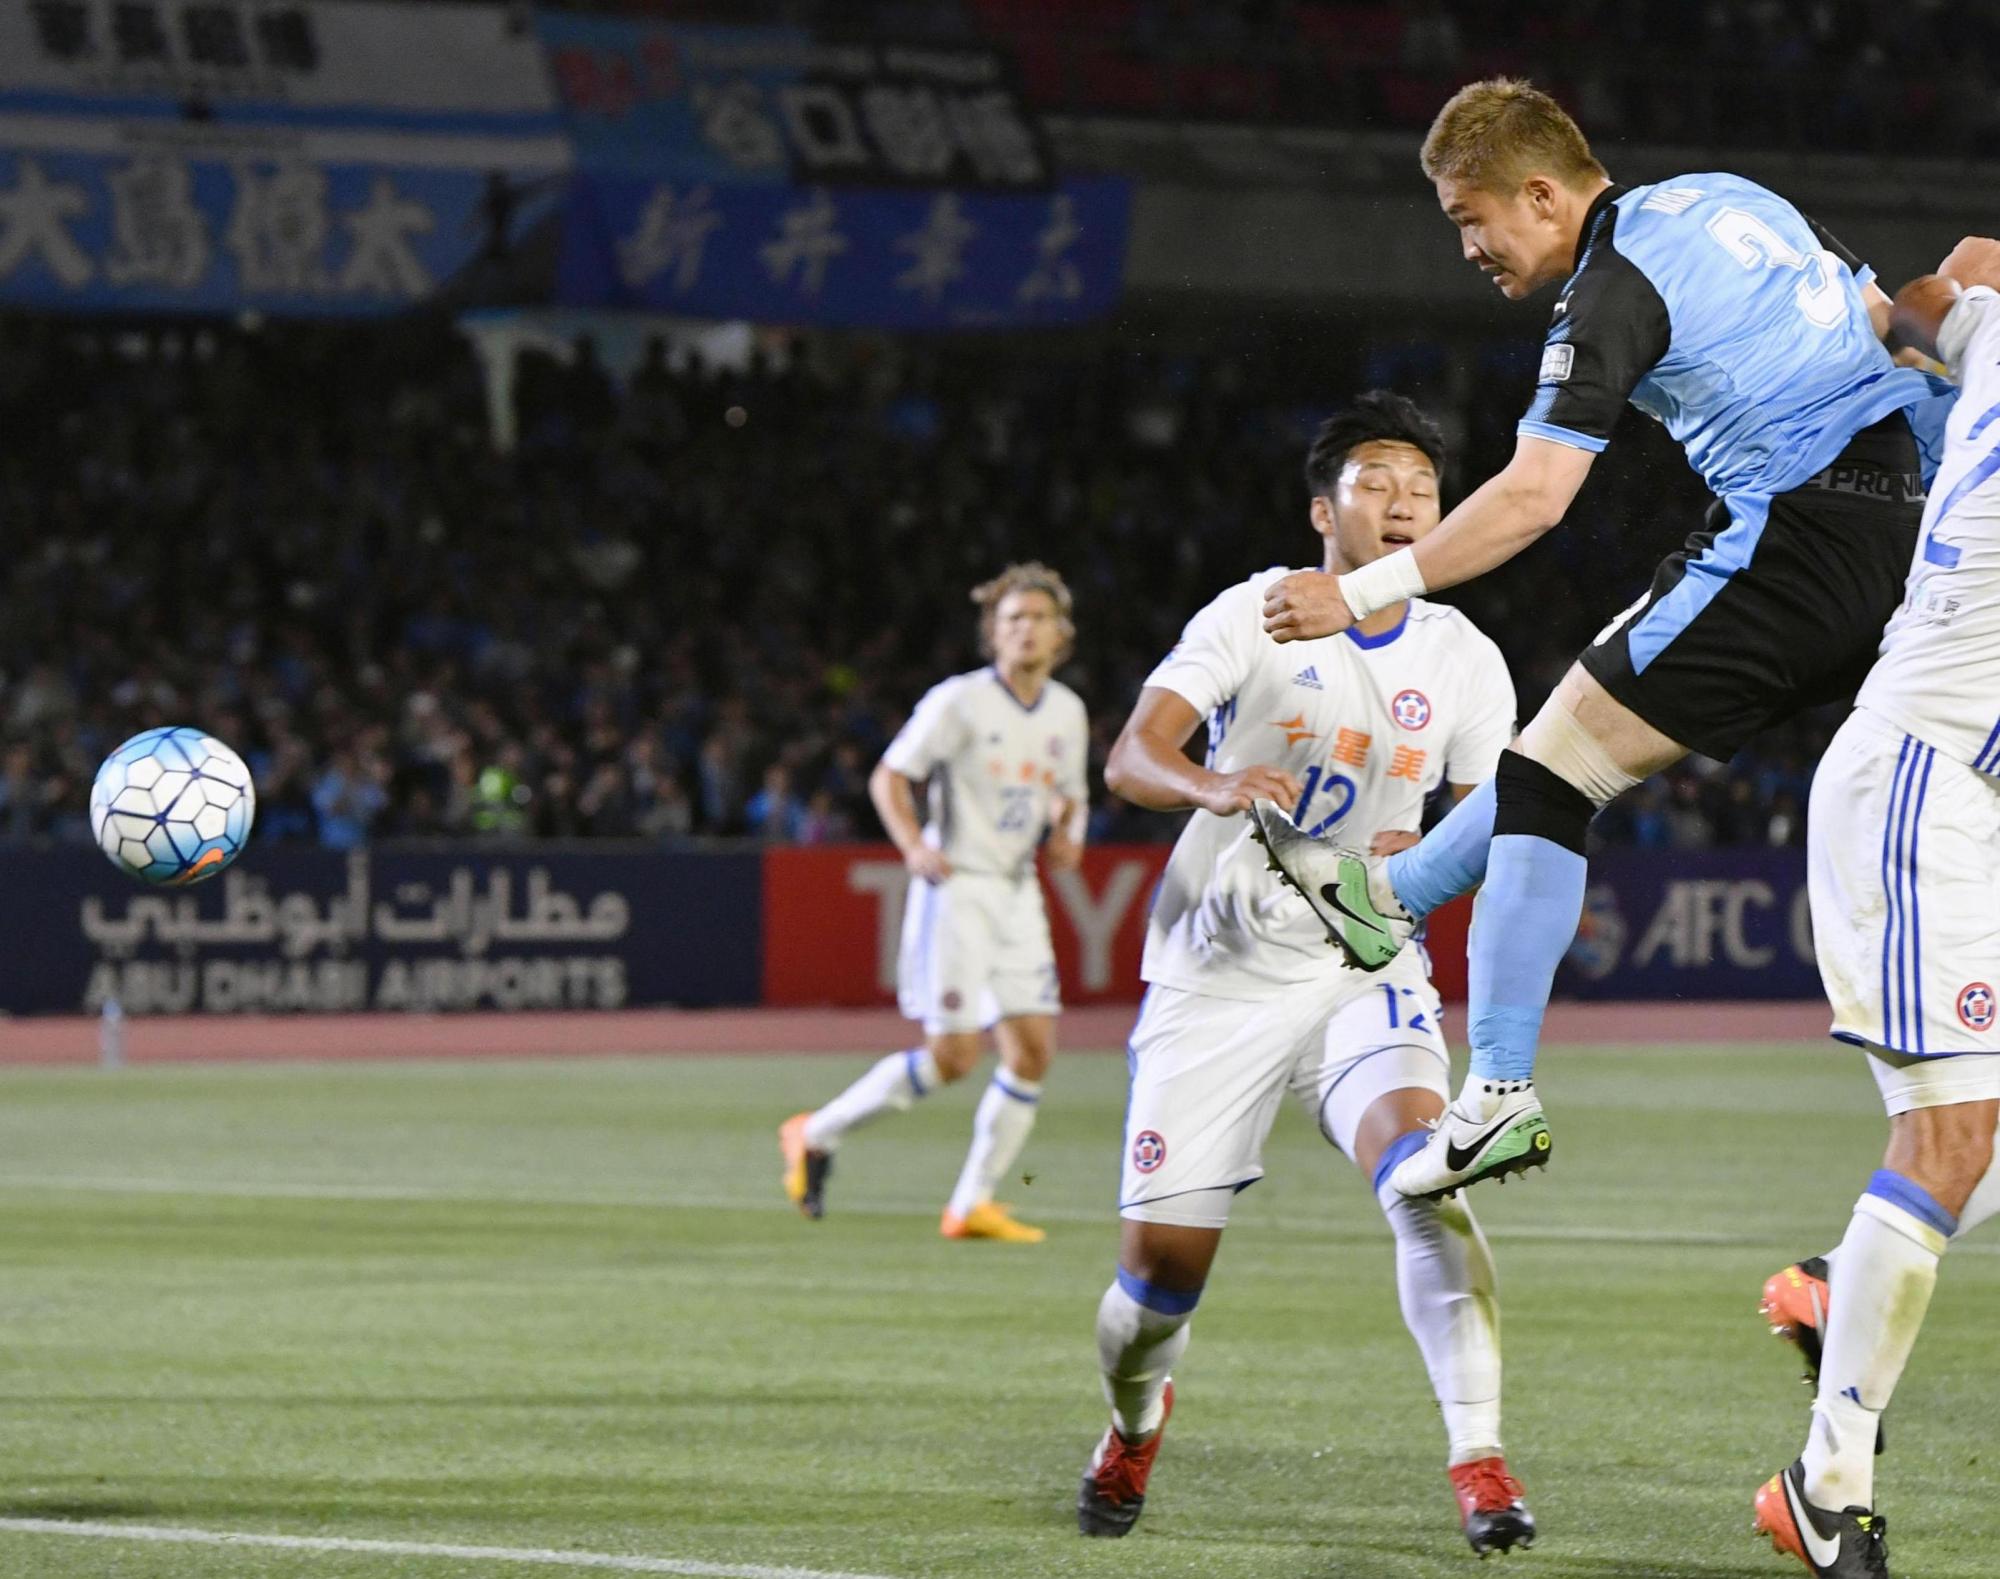 Kawasaki Frontale Beat Eastern SC Lead Group G Of AFC Champions League